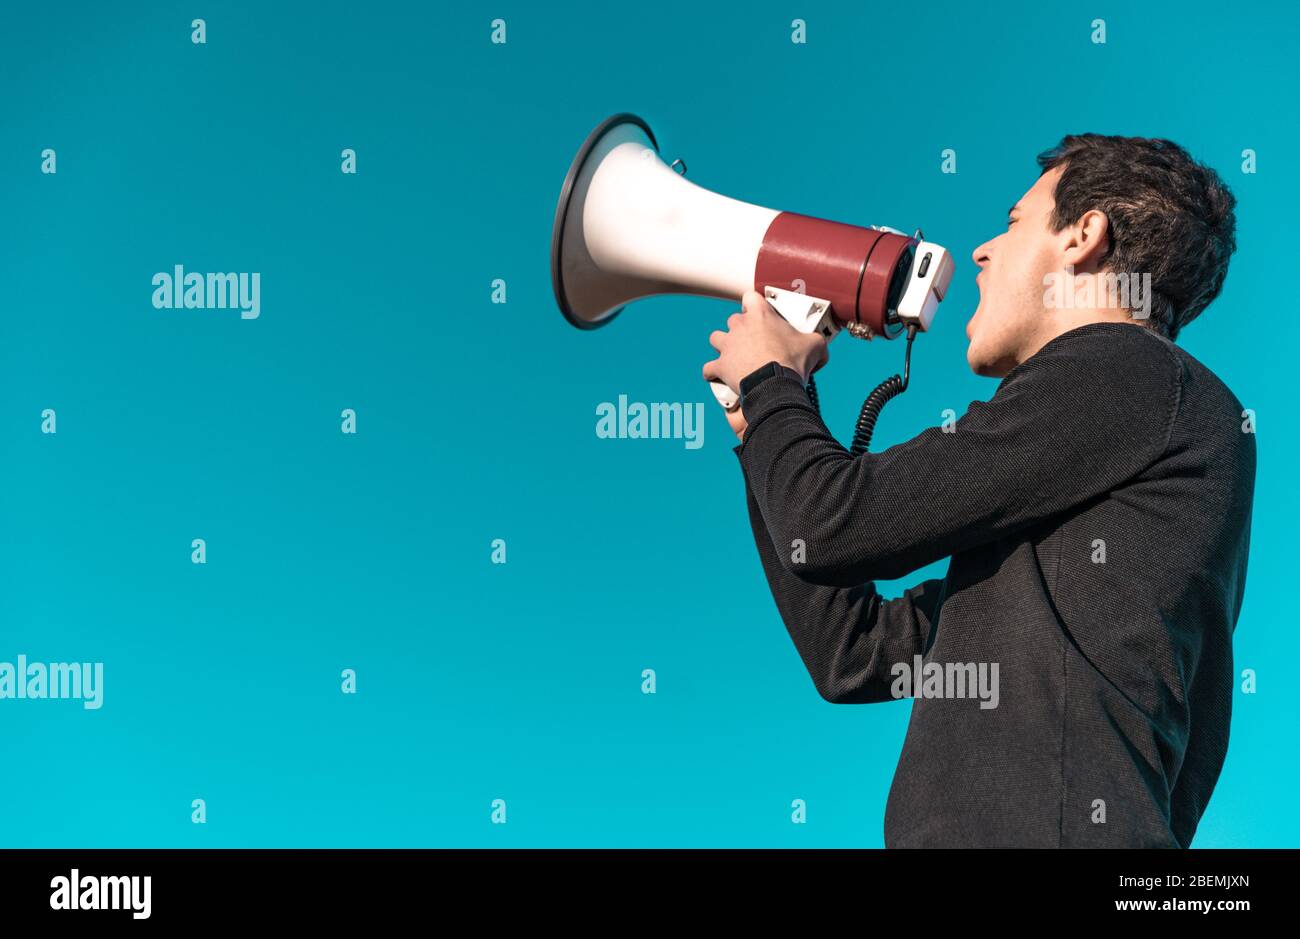 megaphone as a tool for loud communication of important news and information. Copy space. Isolated Stock Photo